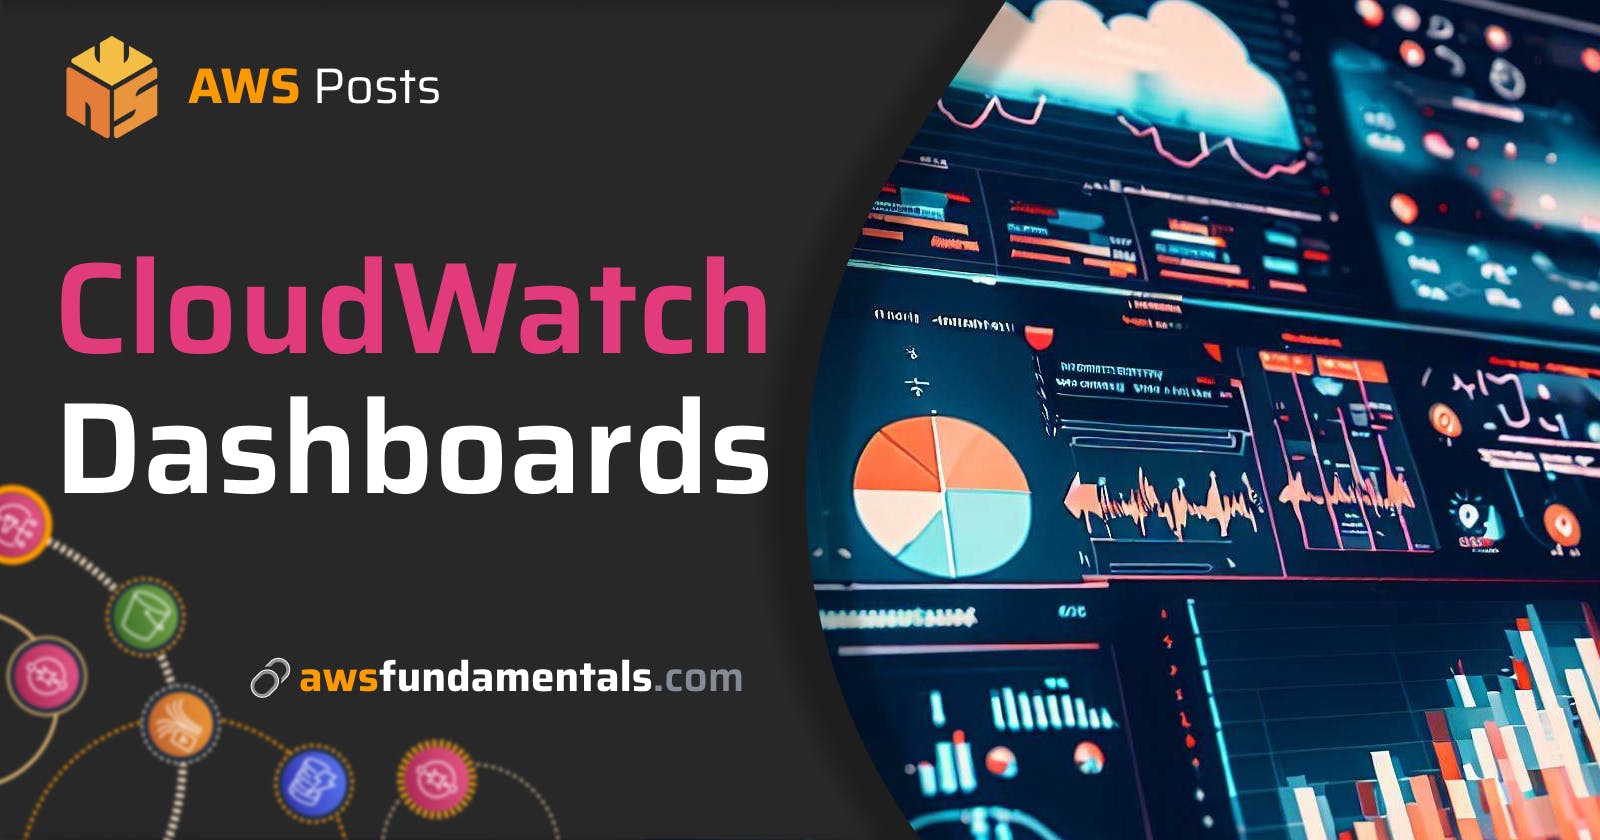 Improve Your AWS Monitoring with CloudWatch Dashboards